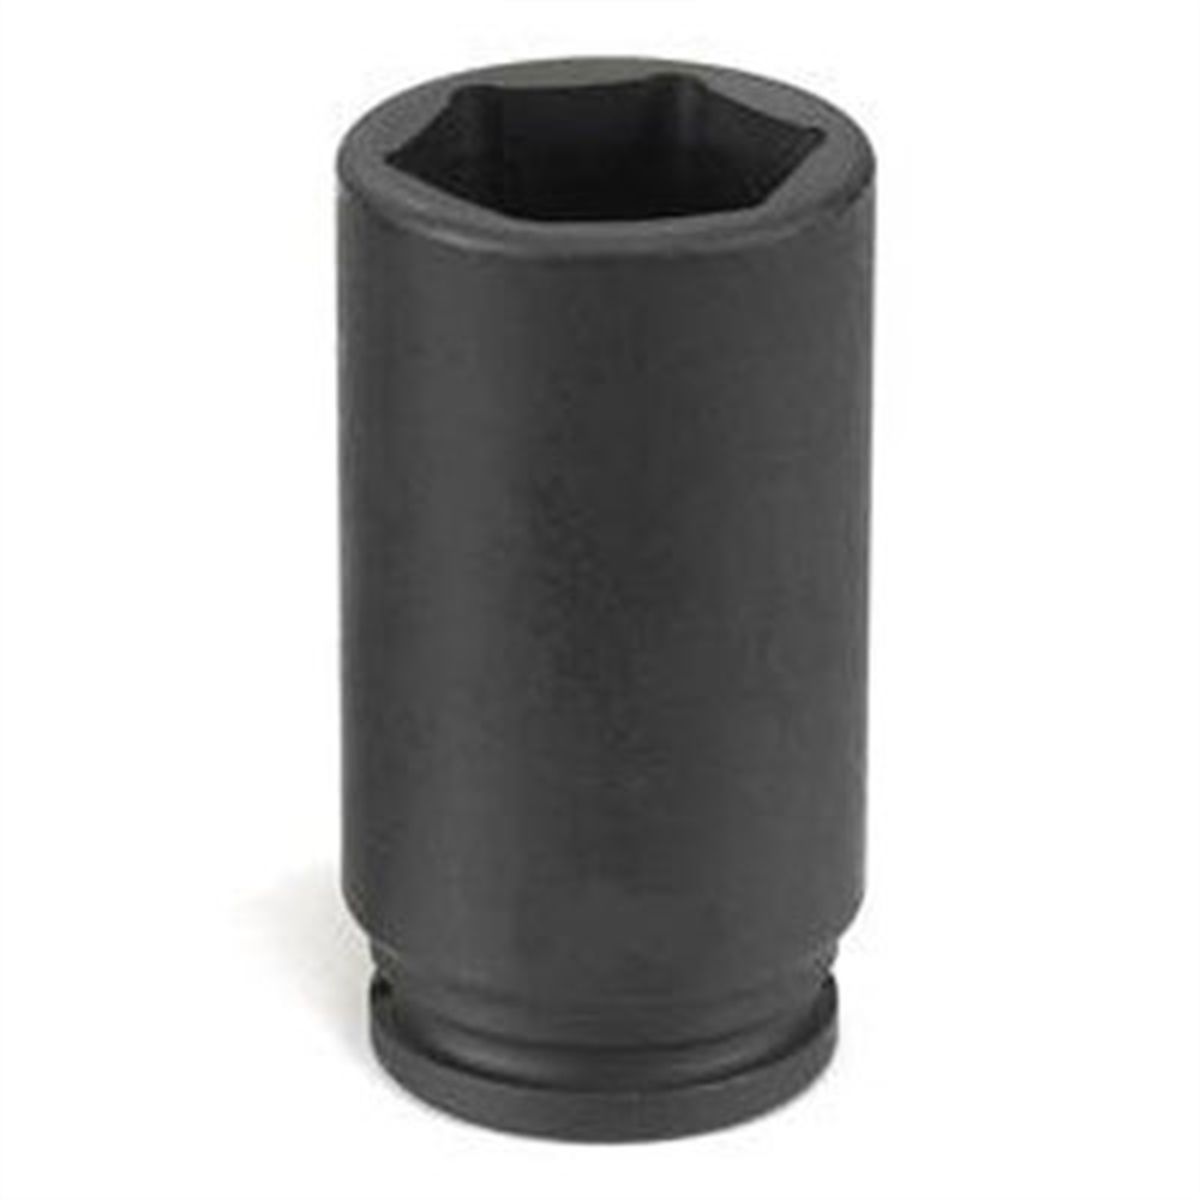 1/2" Drive x 36mm Deep Spindle Nut